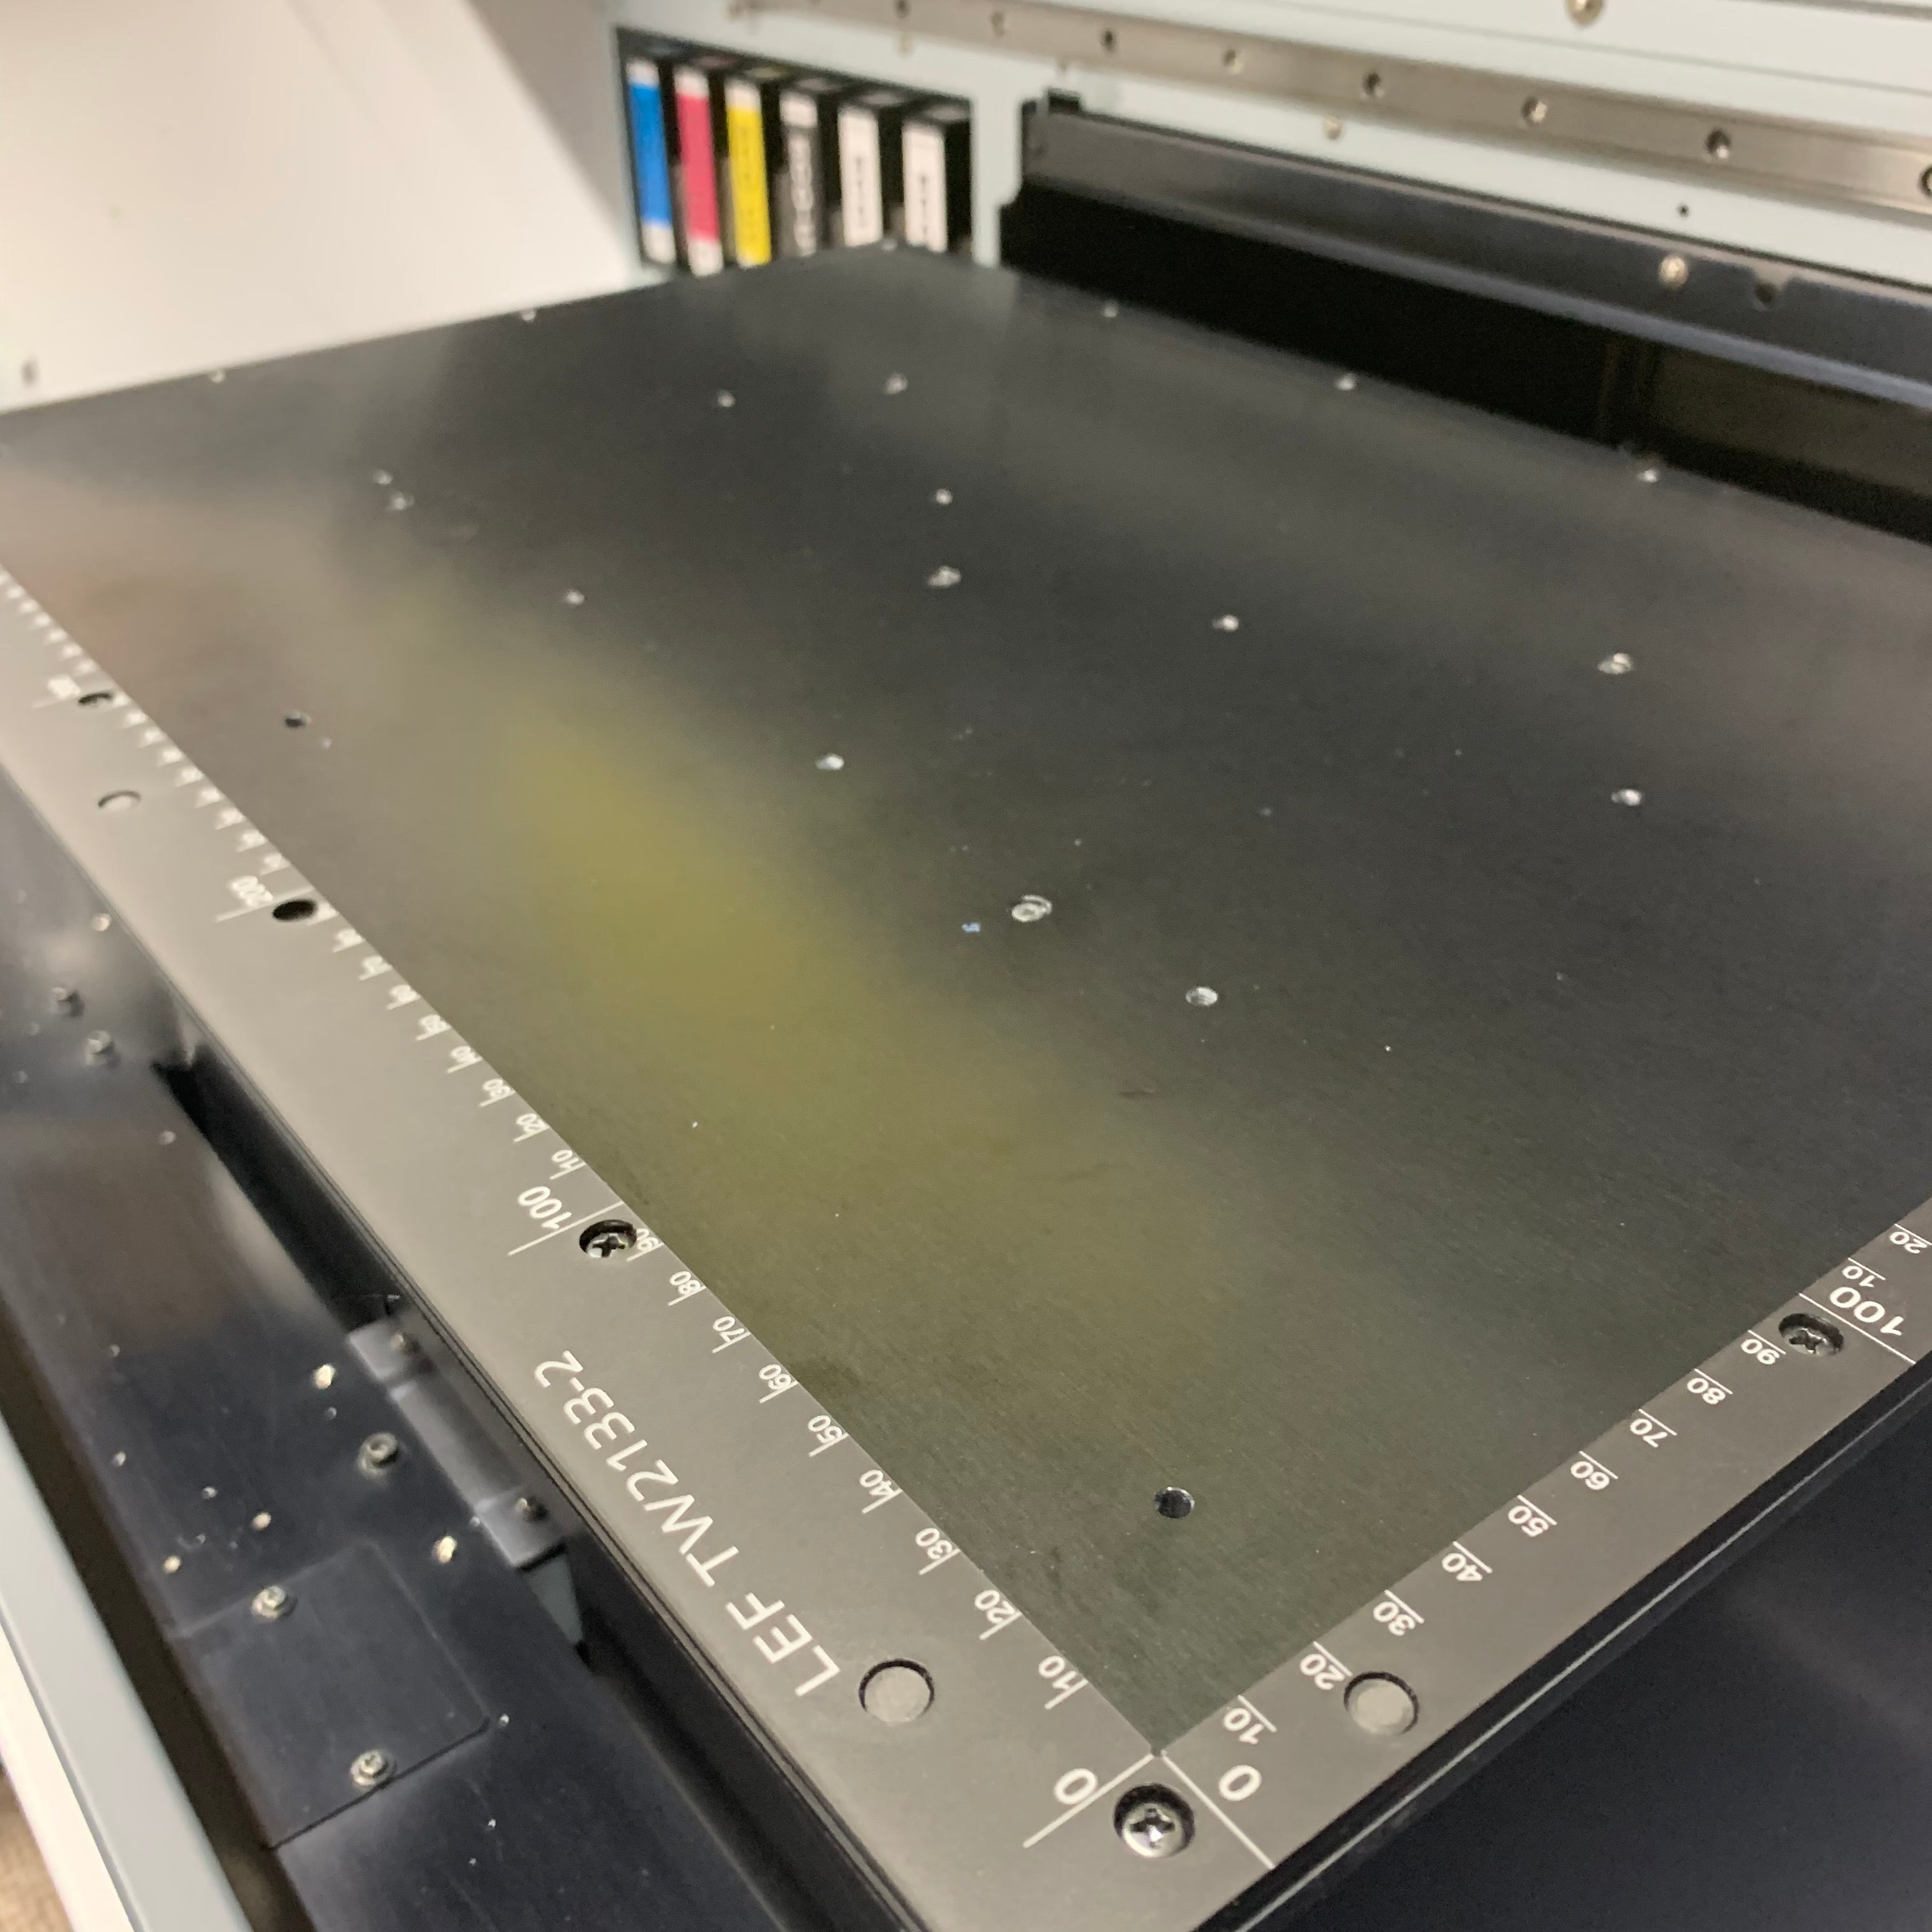 Ruler Printing Guide for Roland MO-240 Flatbed Printer